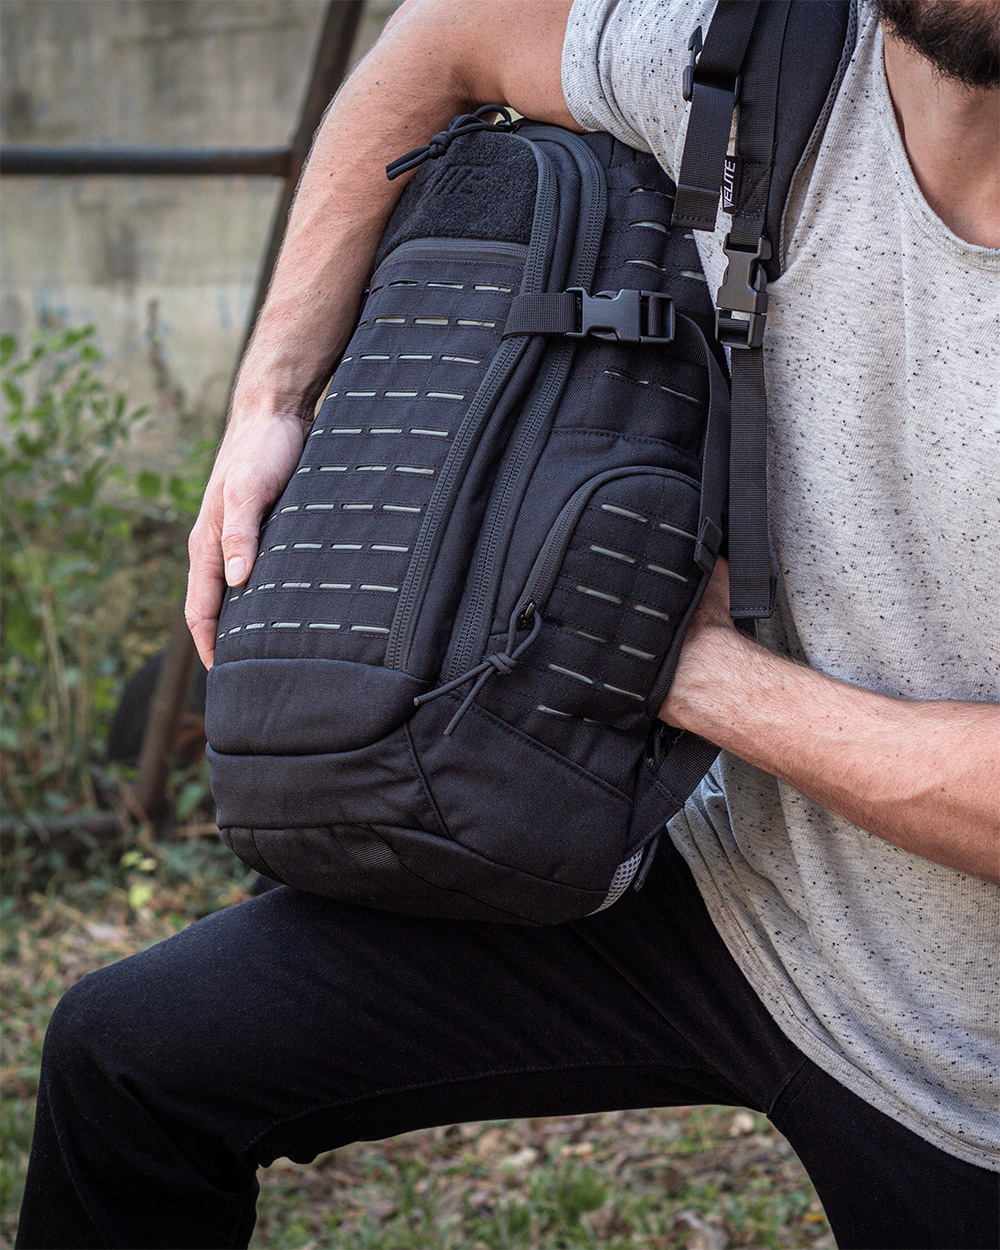 Guardian EDC Backpack with Multiple Compartments for Organization and CCW Firearm Storage